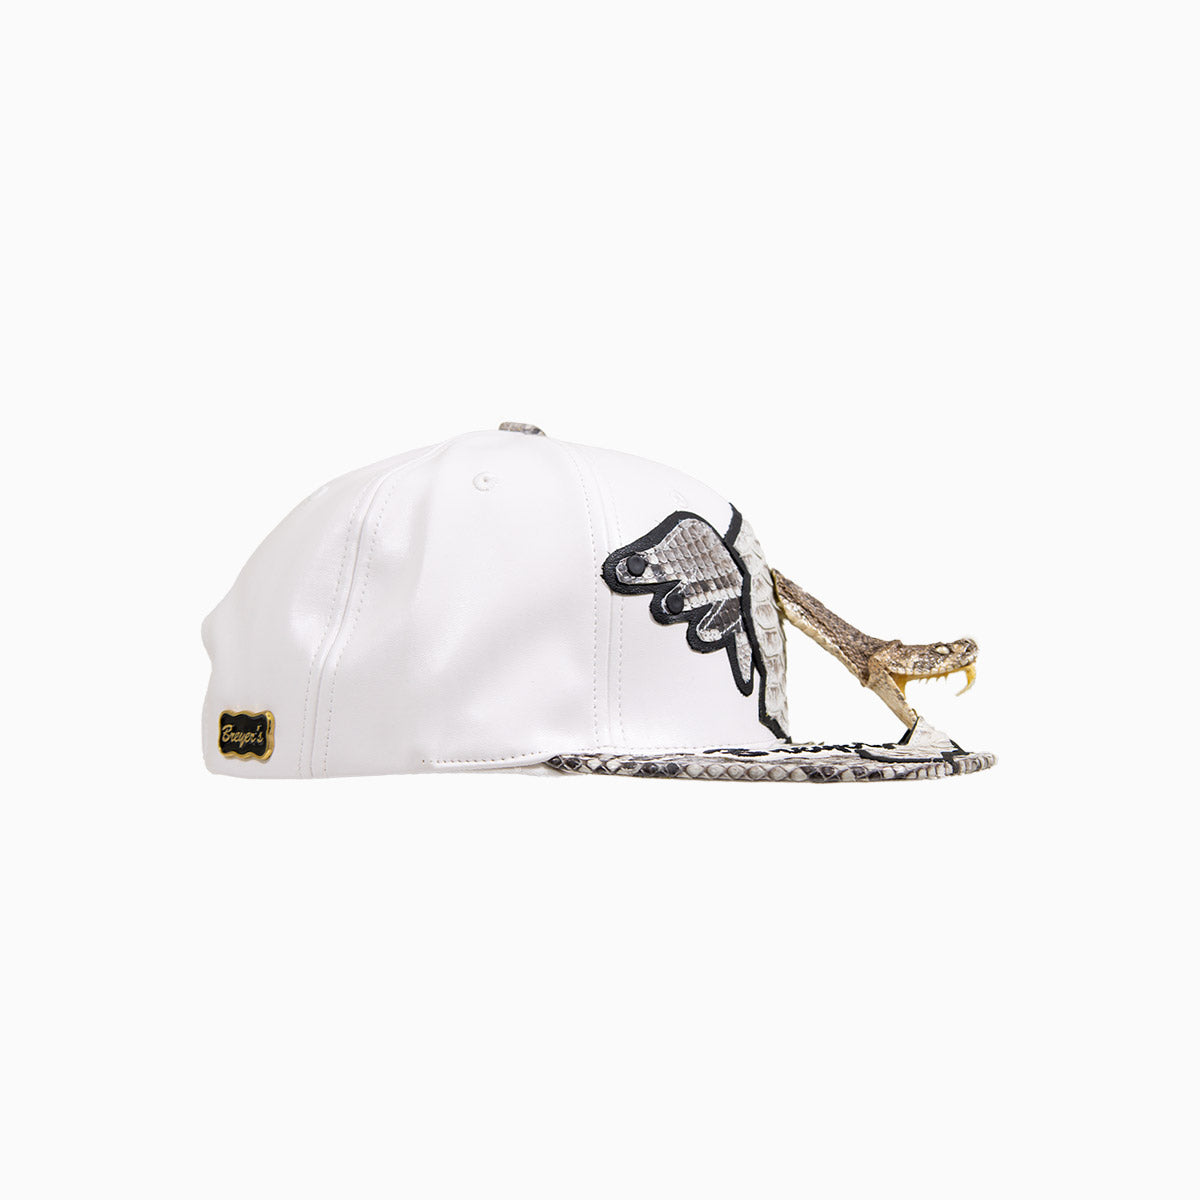 breyers-buck-50-leather-hat-with-faux-snake-skin-visor-breyers-slh-white-gry